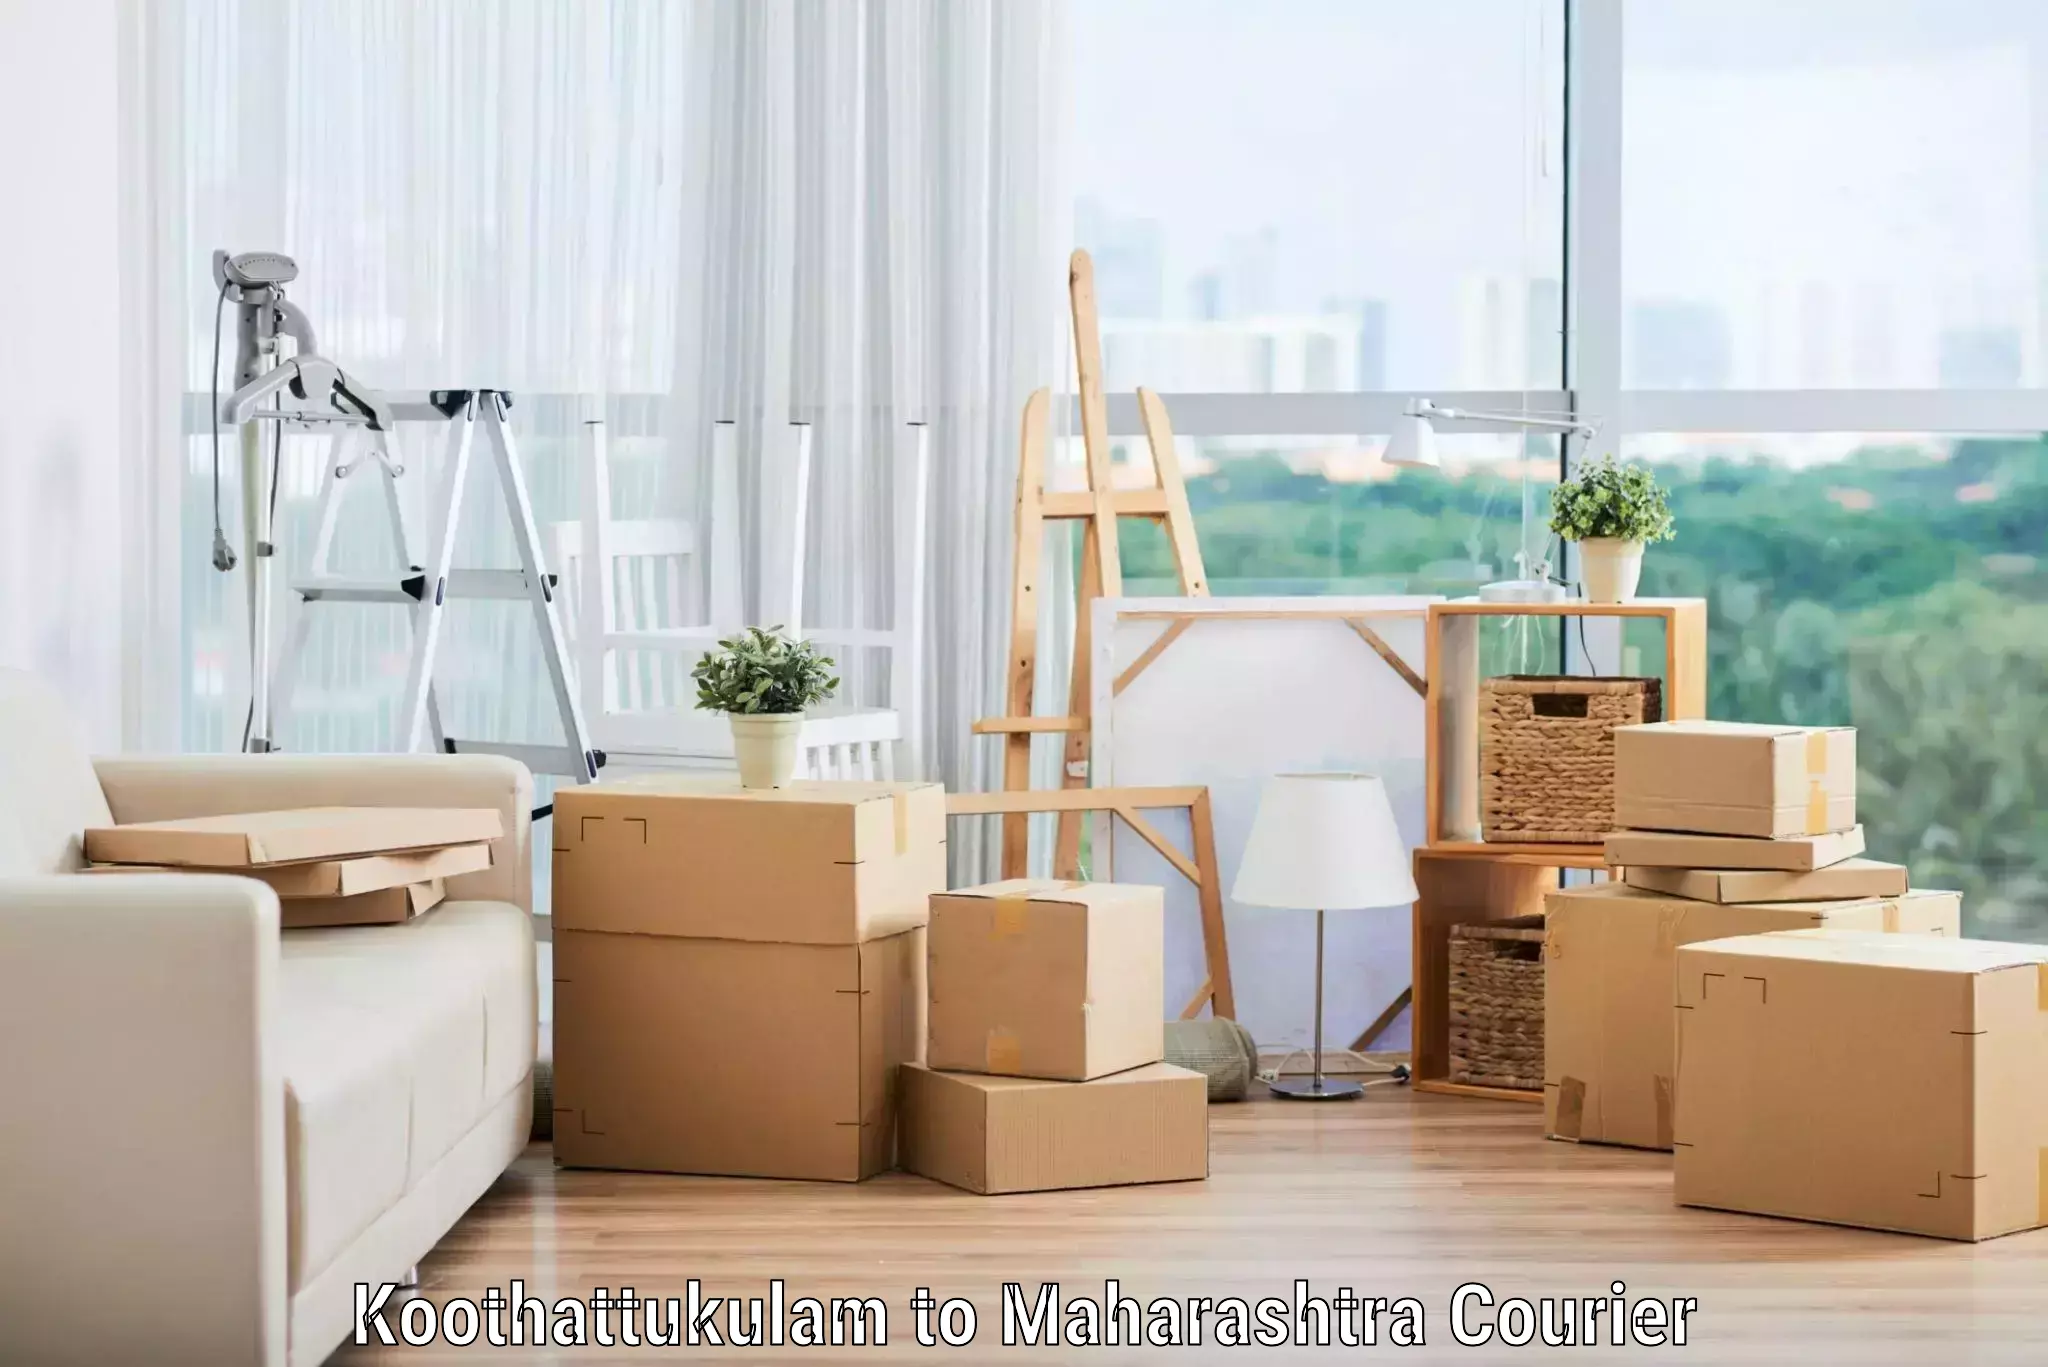 Professional movers and packers Koothattukulam to Aheri